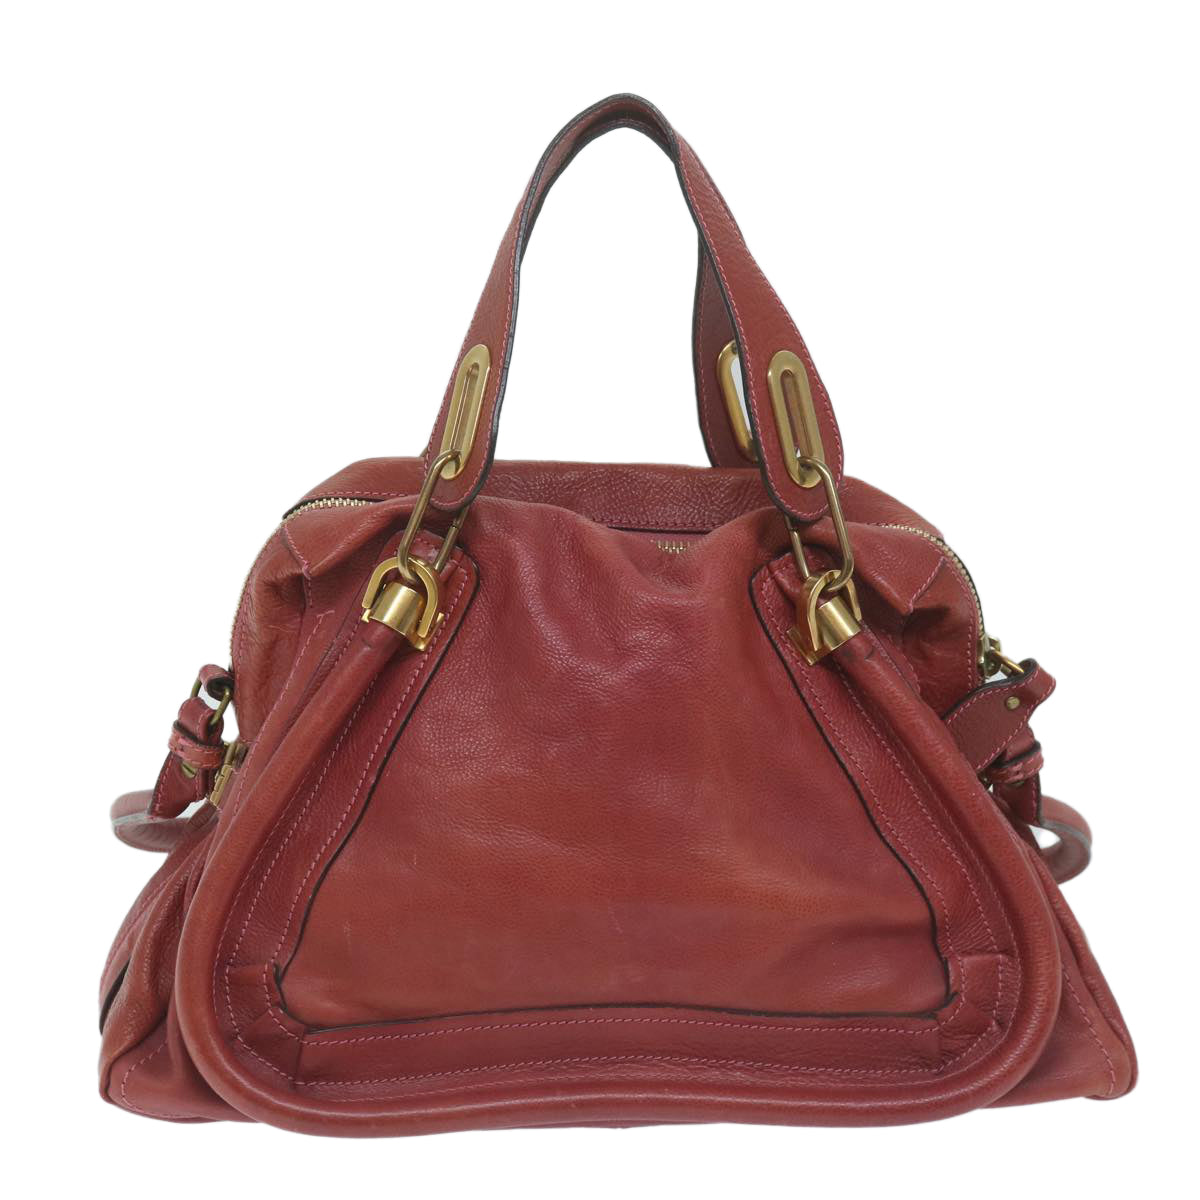 Chloe Paraty Hand Bag Leather Red Auth am5508 - 0